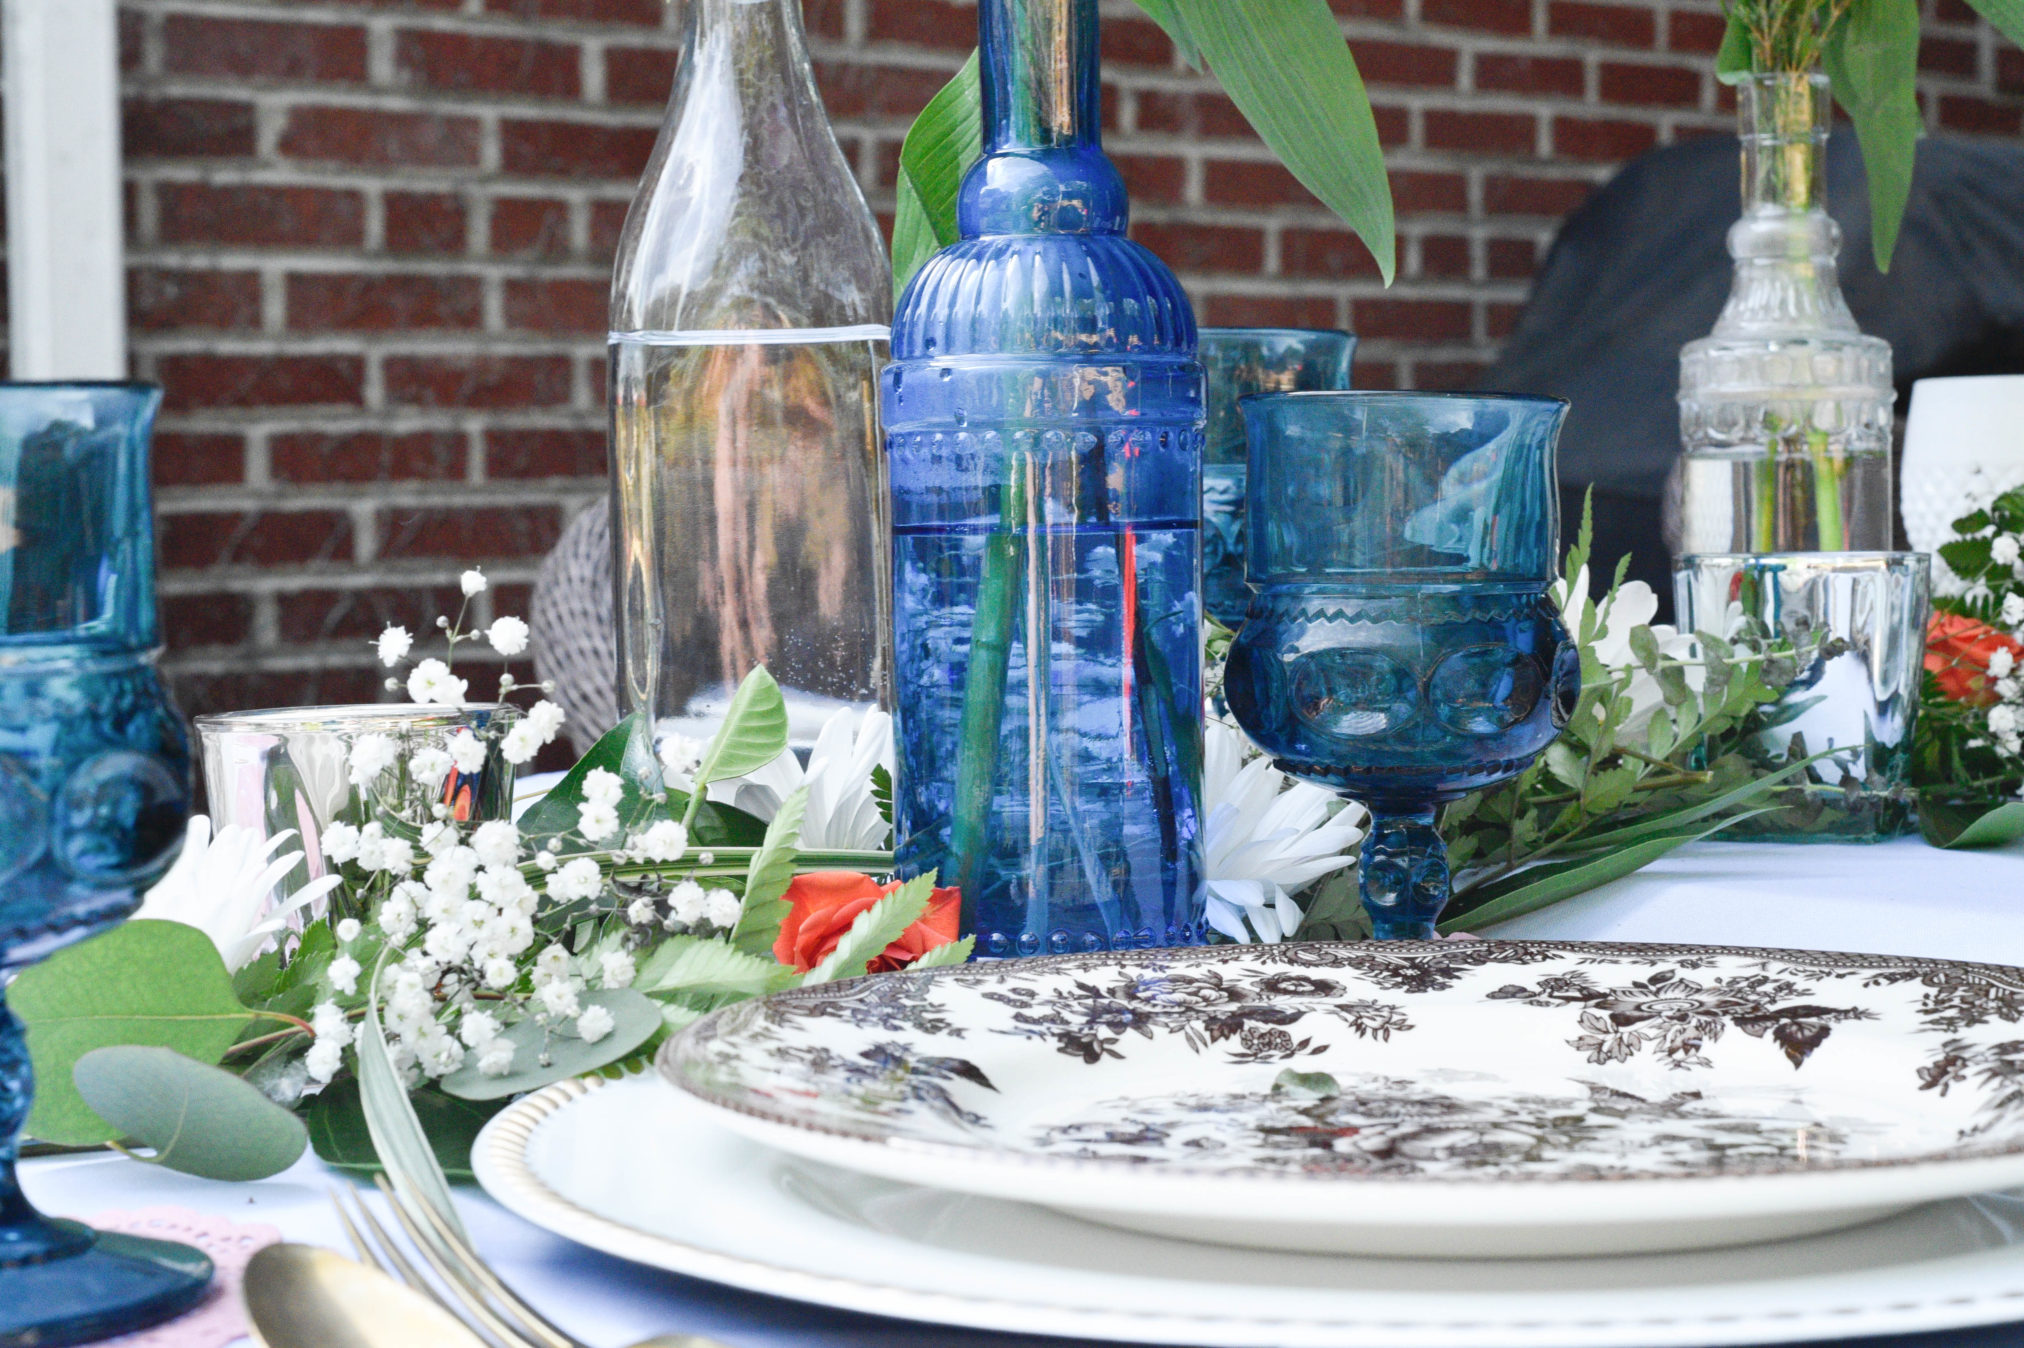 Hosting a ladies brunch or a vintage inspired party, here are tips on how to style a vintage inspired tablescape, see more at www.homewithkeki.com #vintage #tablescape #summerparties